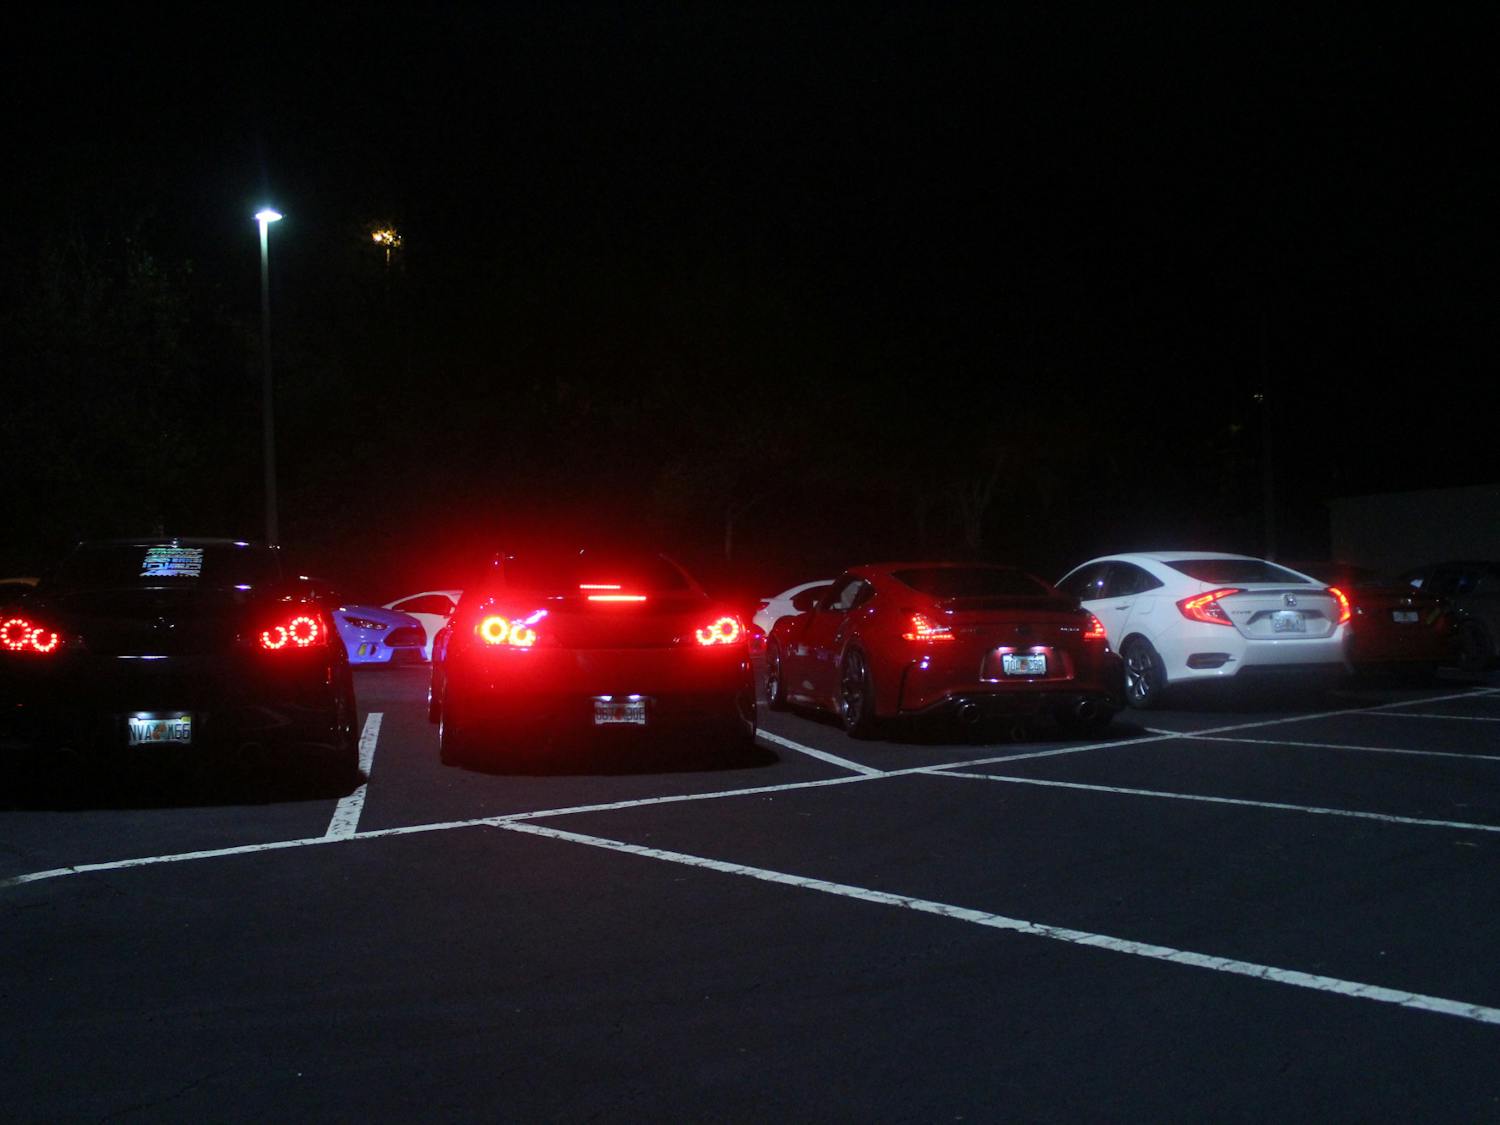 Members of the Gainesville car scene liven empty parking lots Tuesdays and Fridays with headlights and car speakers, as pictured Friday, June 10, 2022.